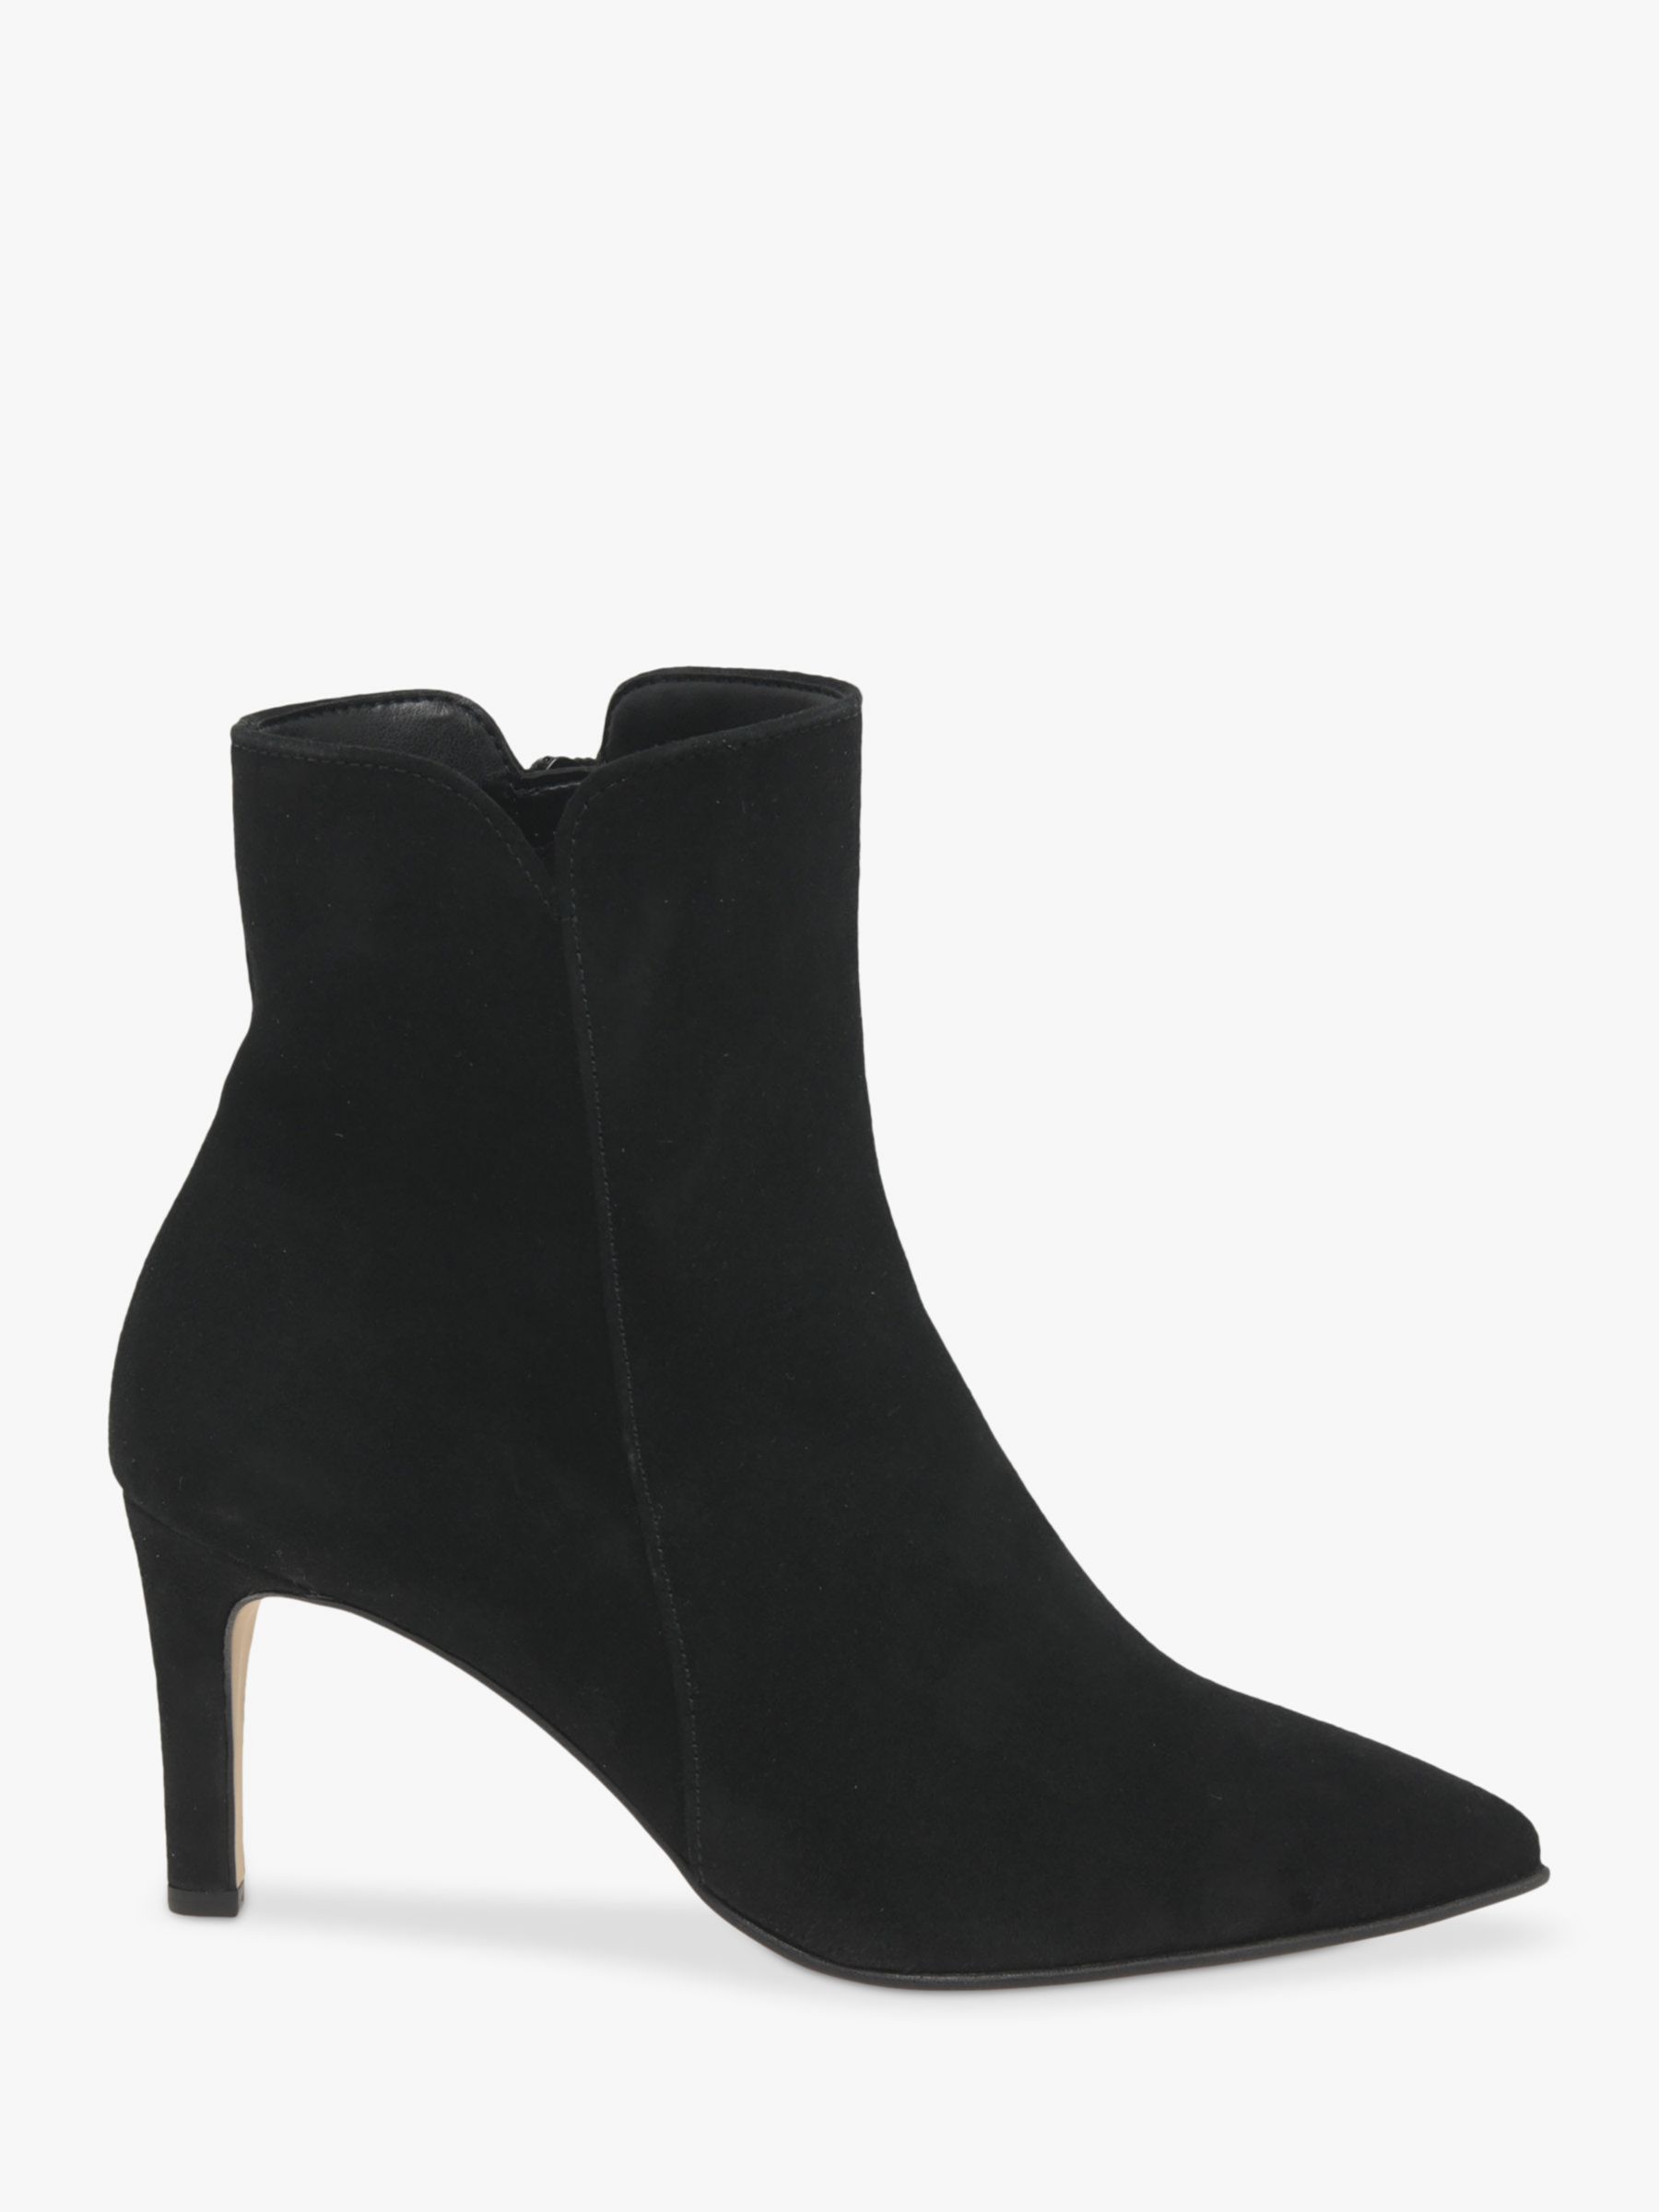 Gabor Bambro Dressy Suede Mid Heel Ankle Boots, Black